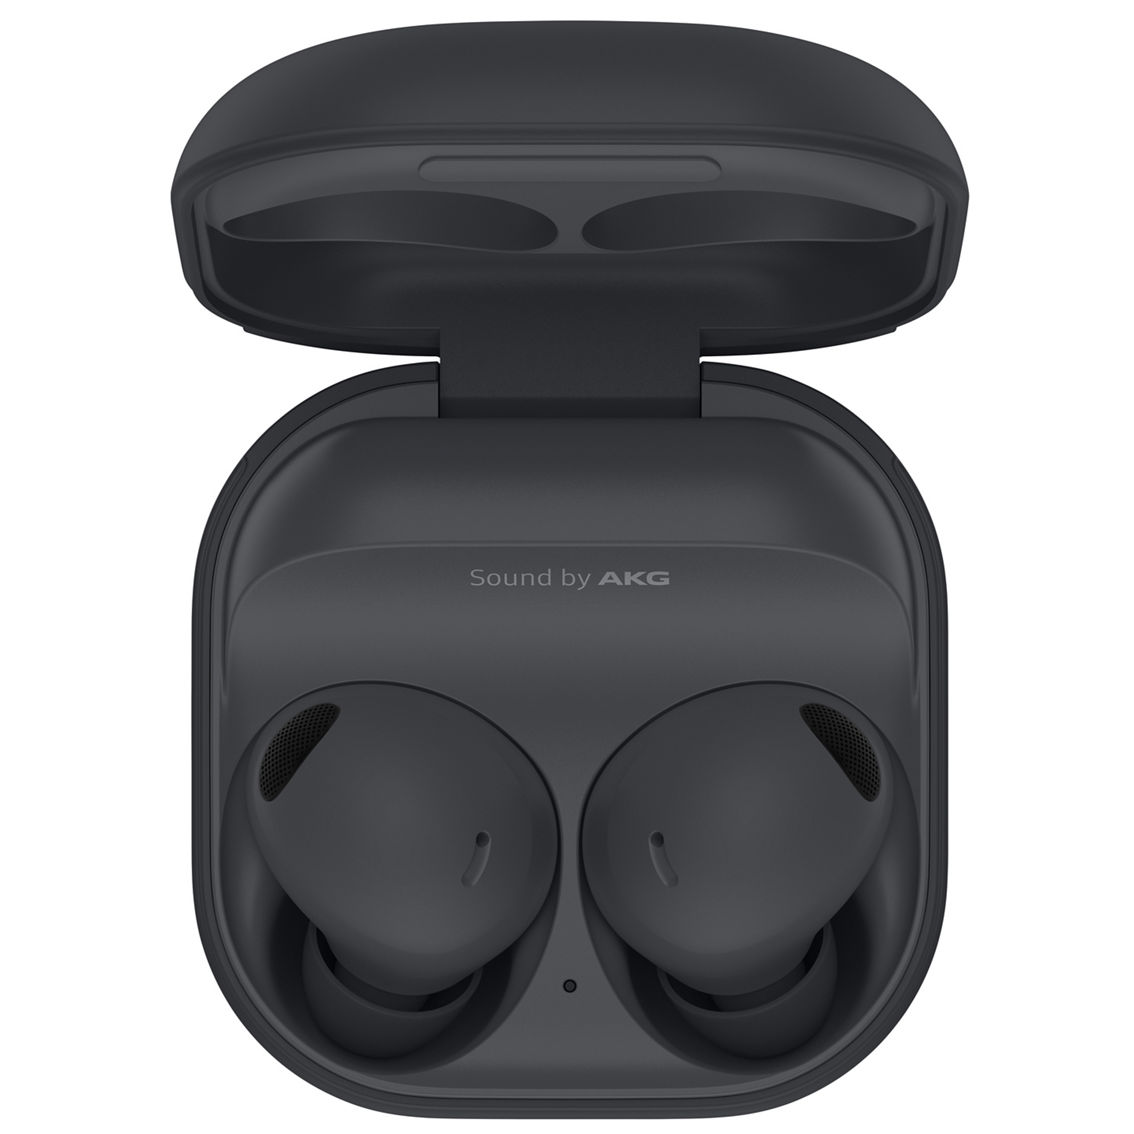 Samsung Buds2 Pro Wireless Earbuds - Image 3 of 4